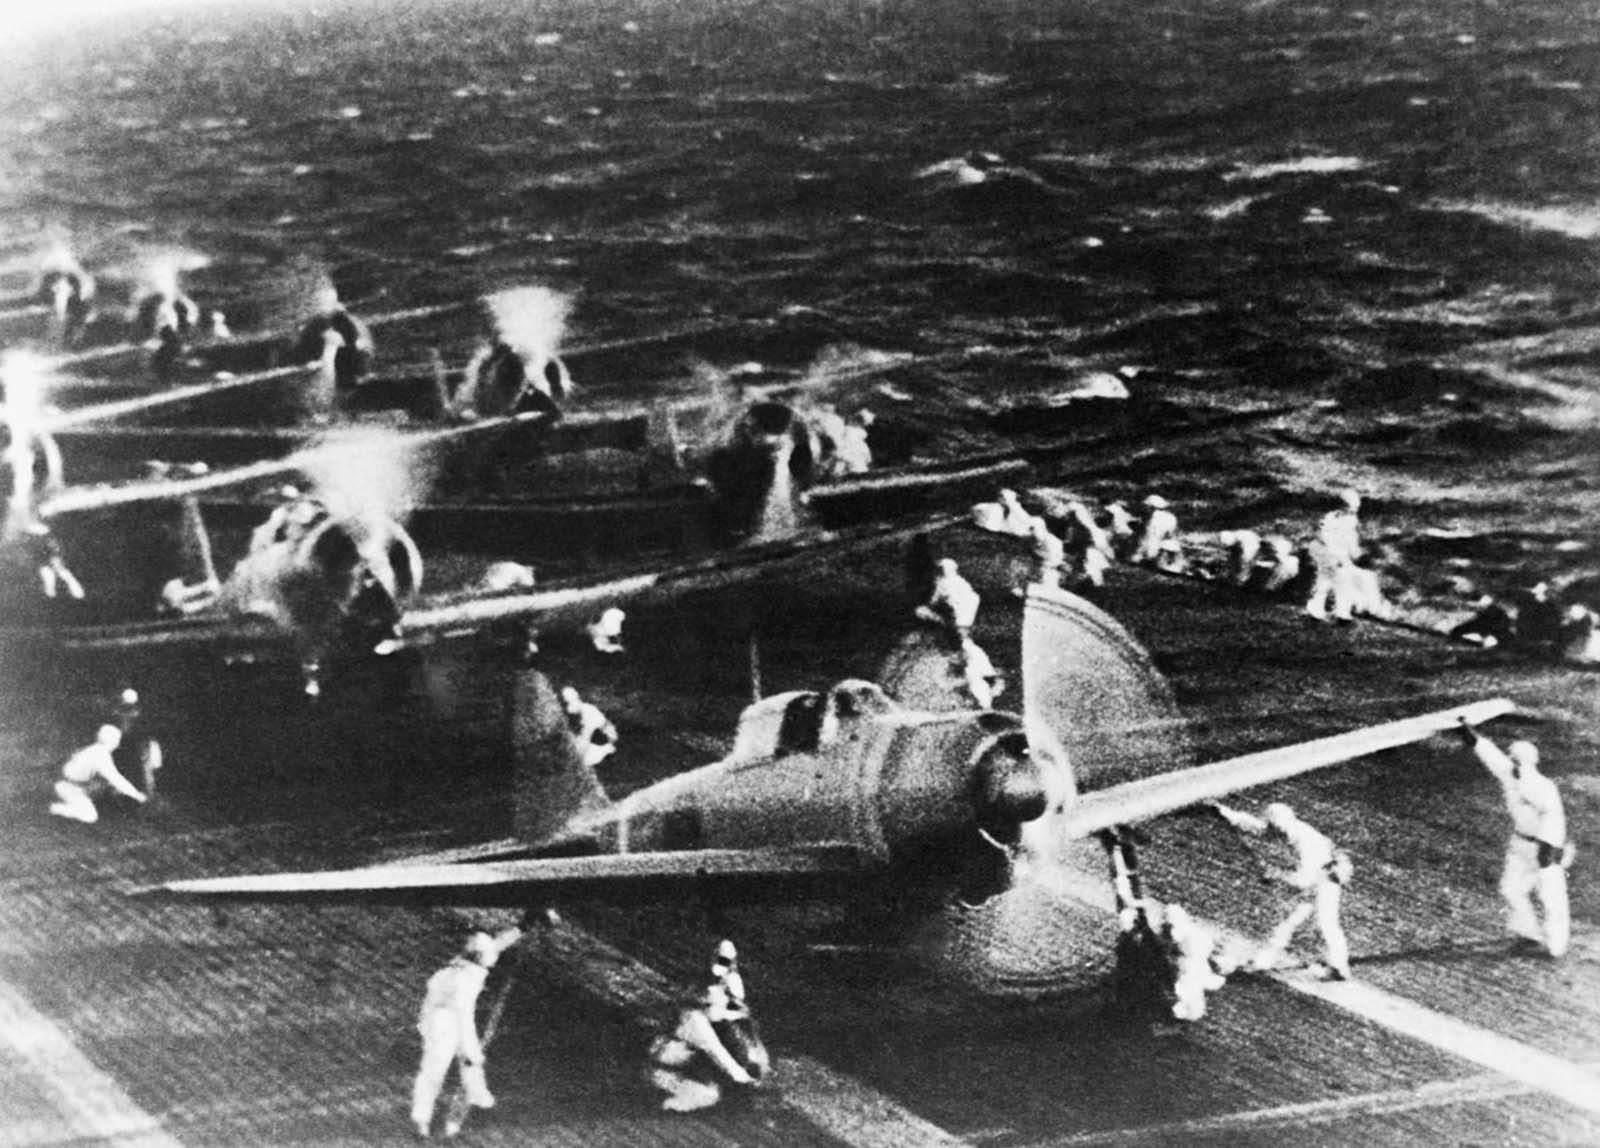 Dive bombers spin up on the deck of a carrier before taking off.